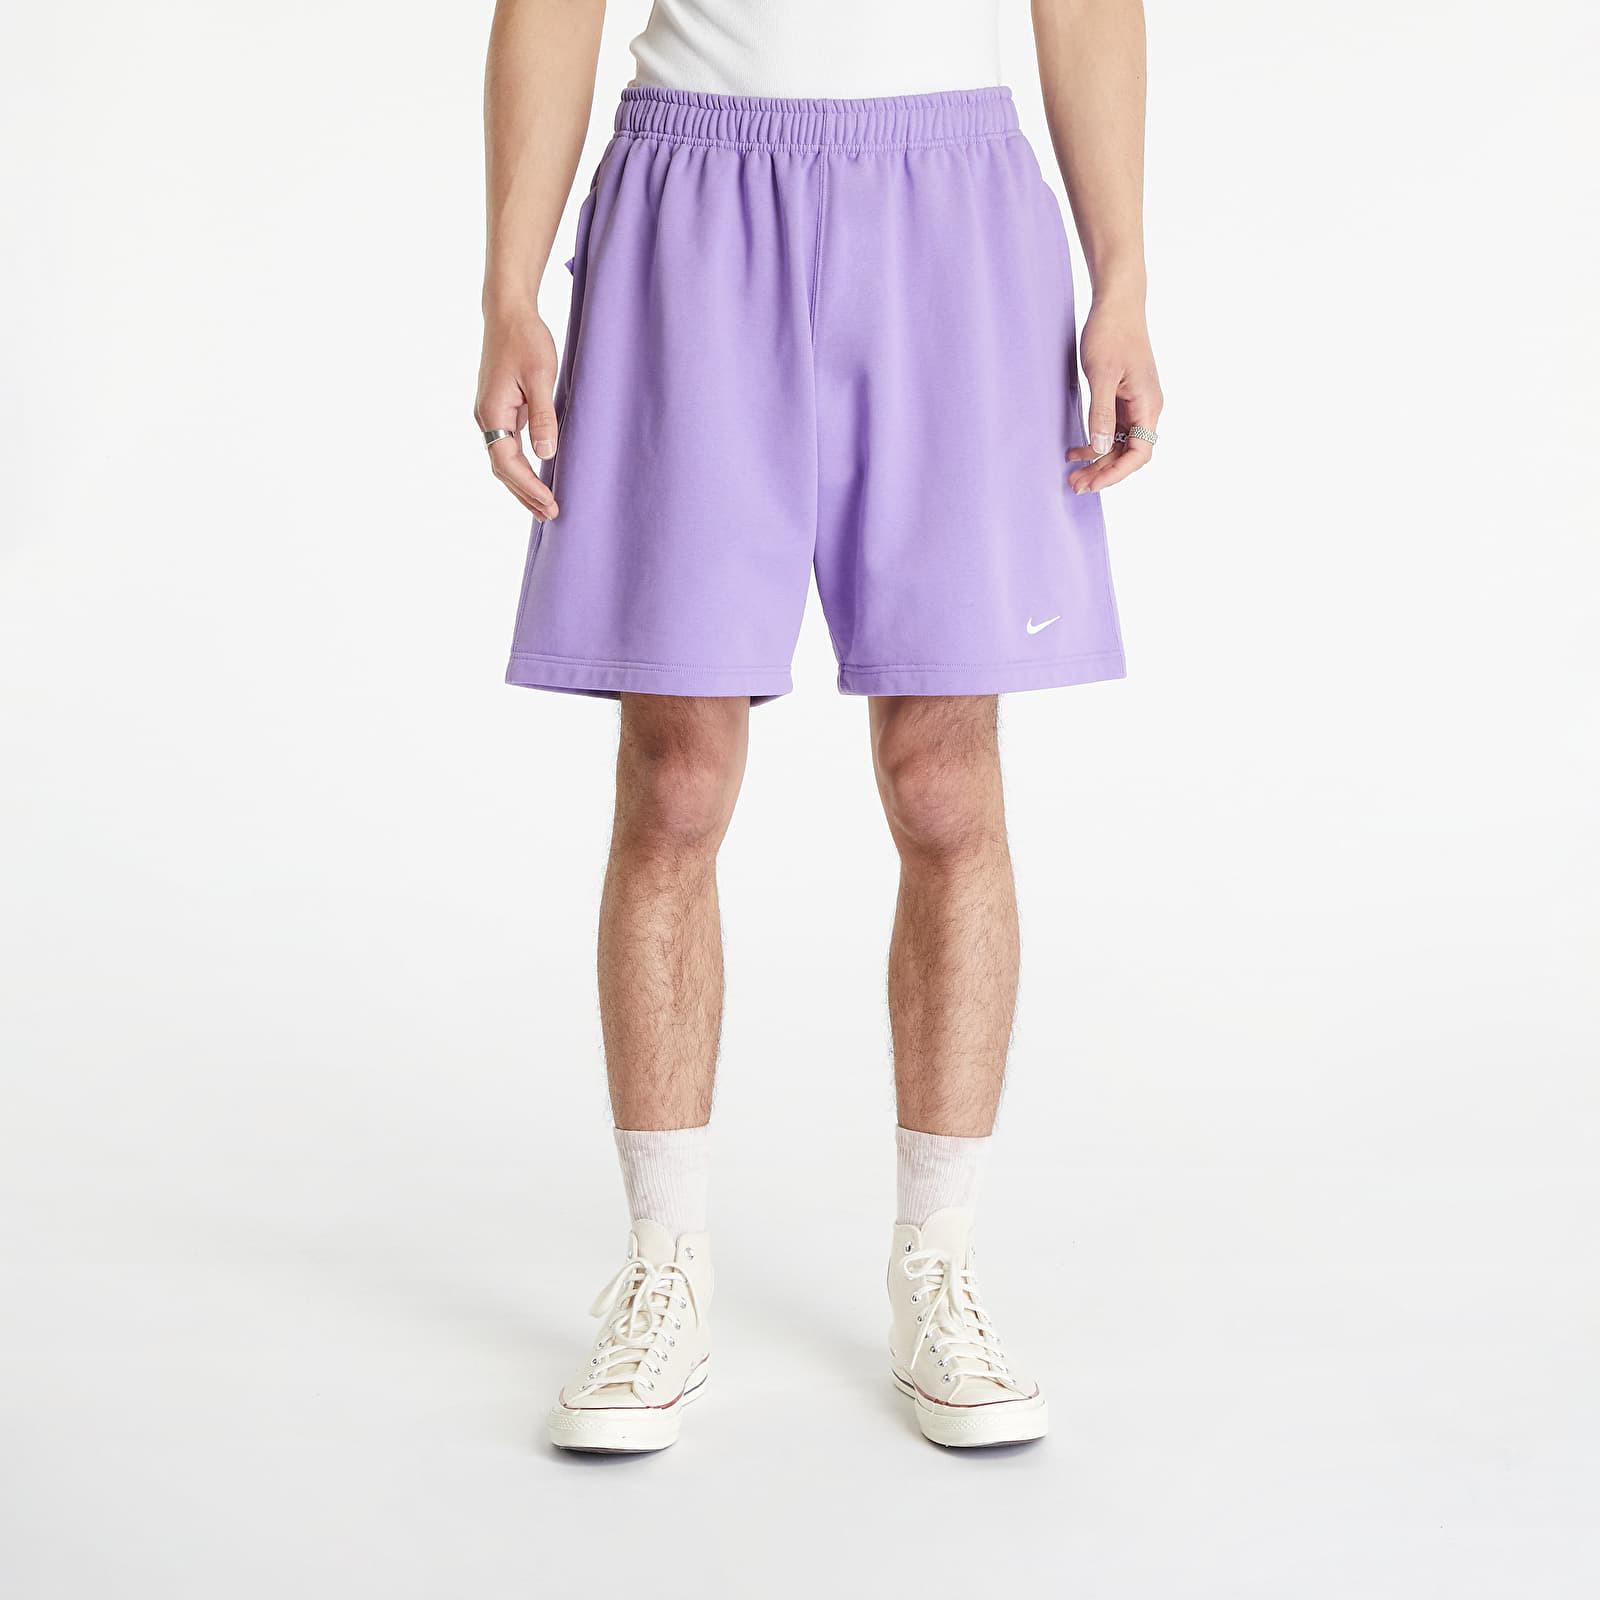 Solo swoosh french terry shorts space purple/ white Nike pour homme | Lyst